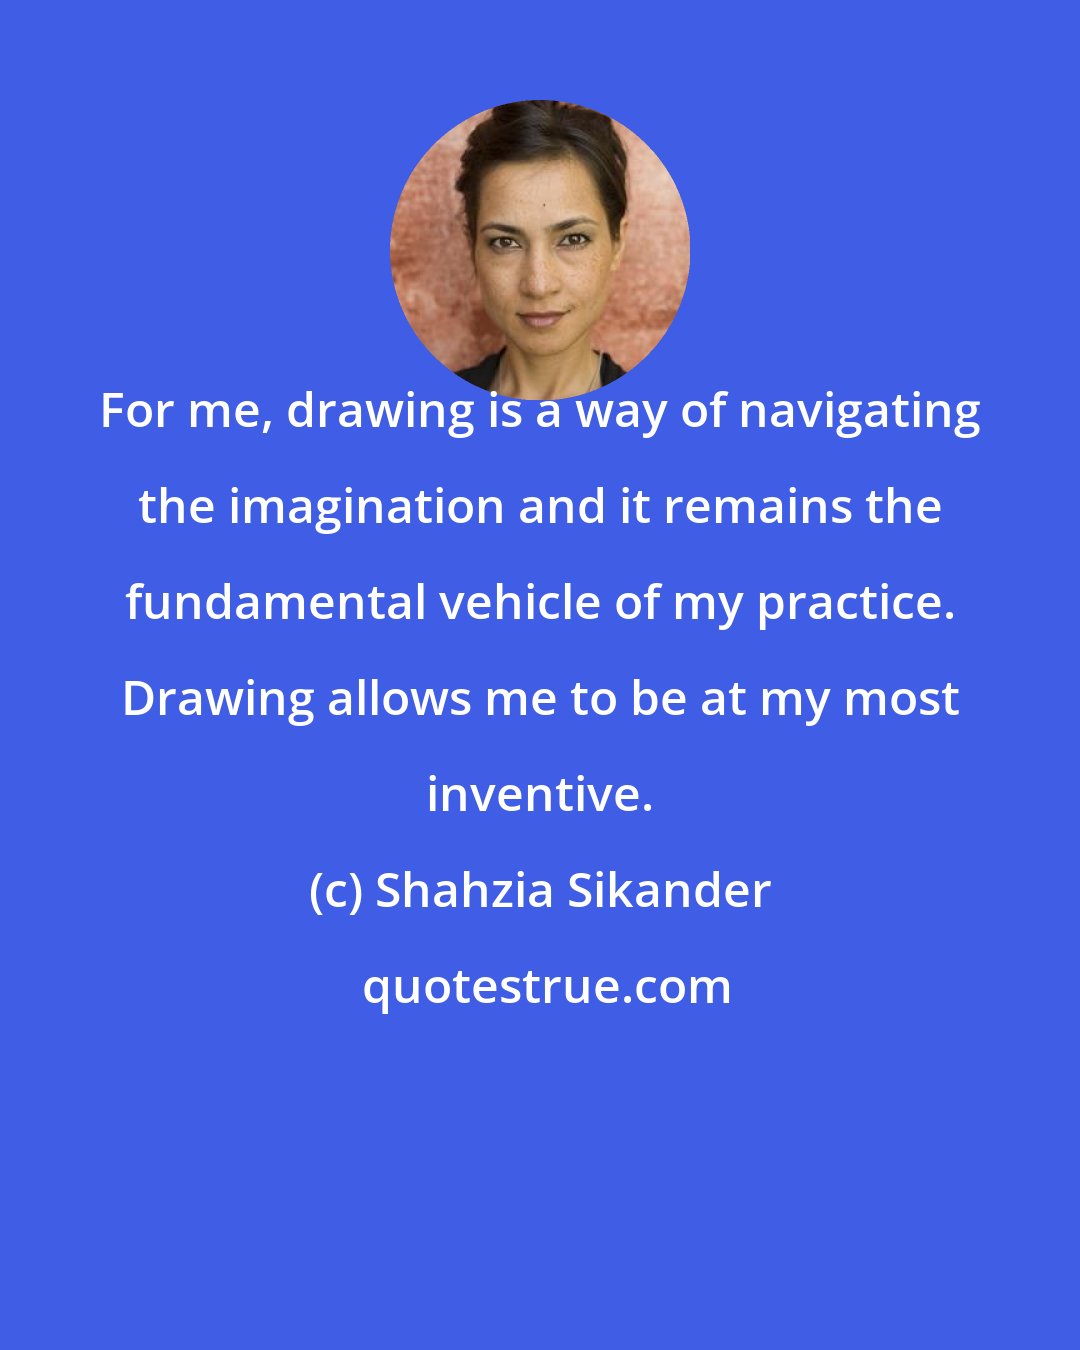 Shahzia Sikander: For me, drawing is a way of navigating the imagination and it remains the fundamental vehicle of my practice. Drawing allows me to be at my most inventive.